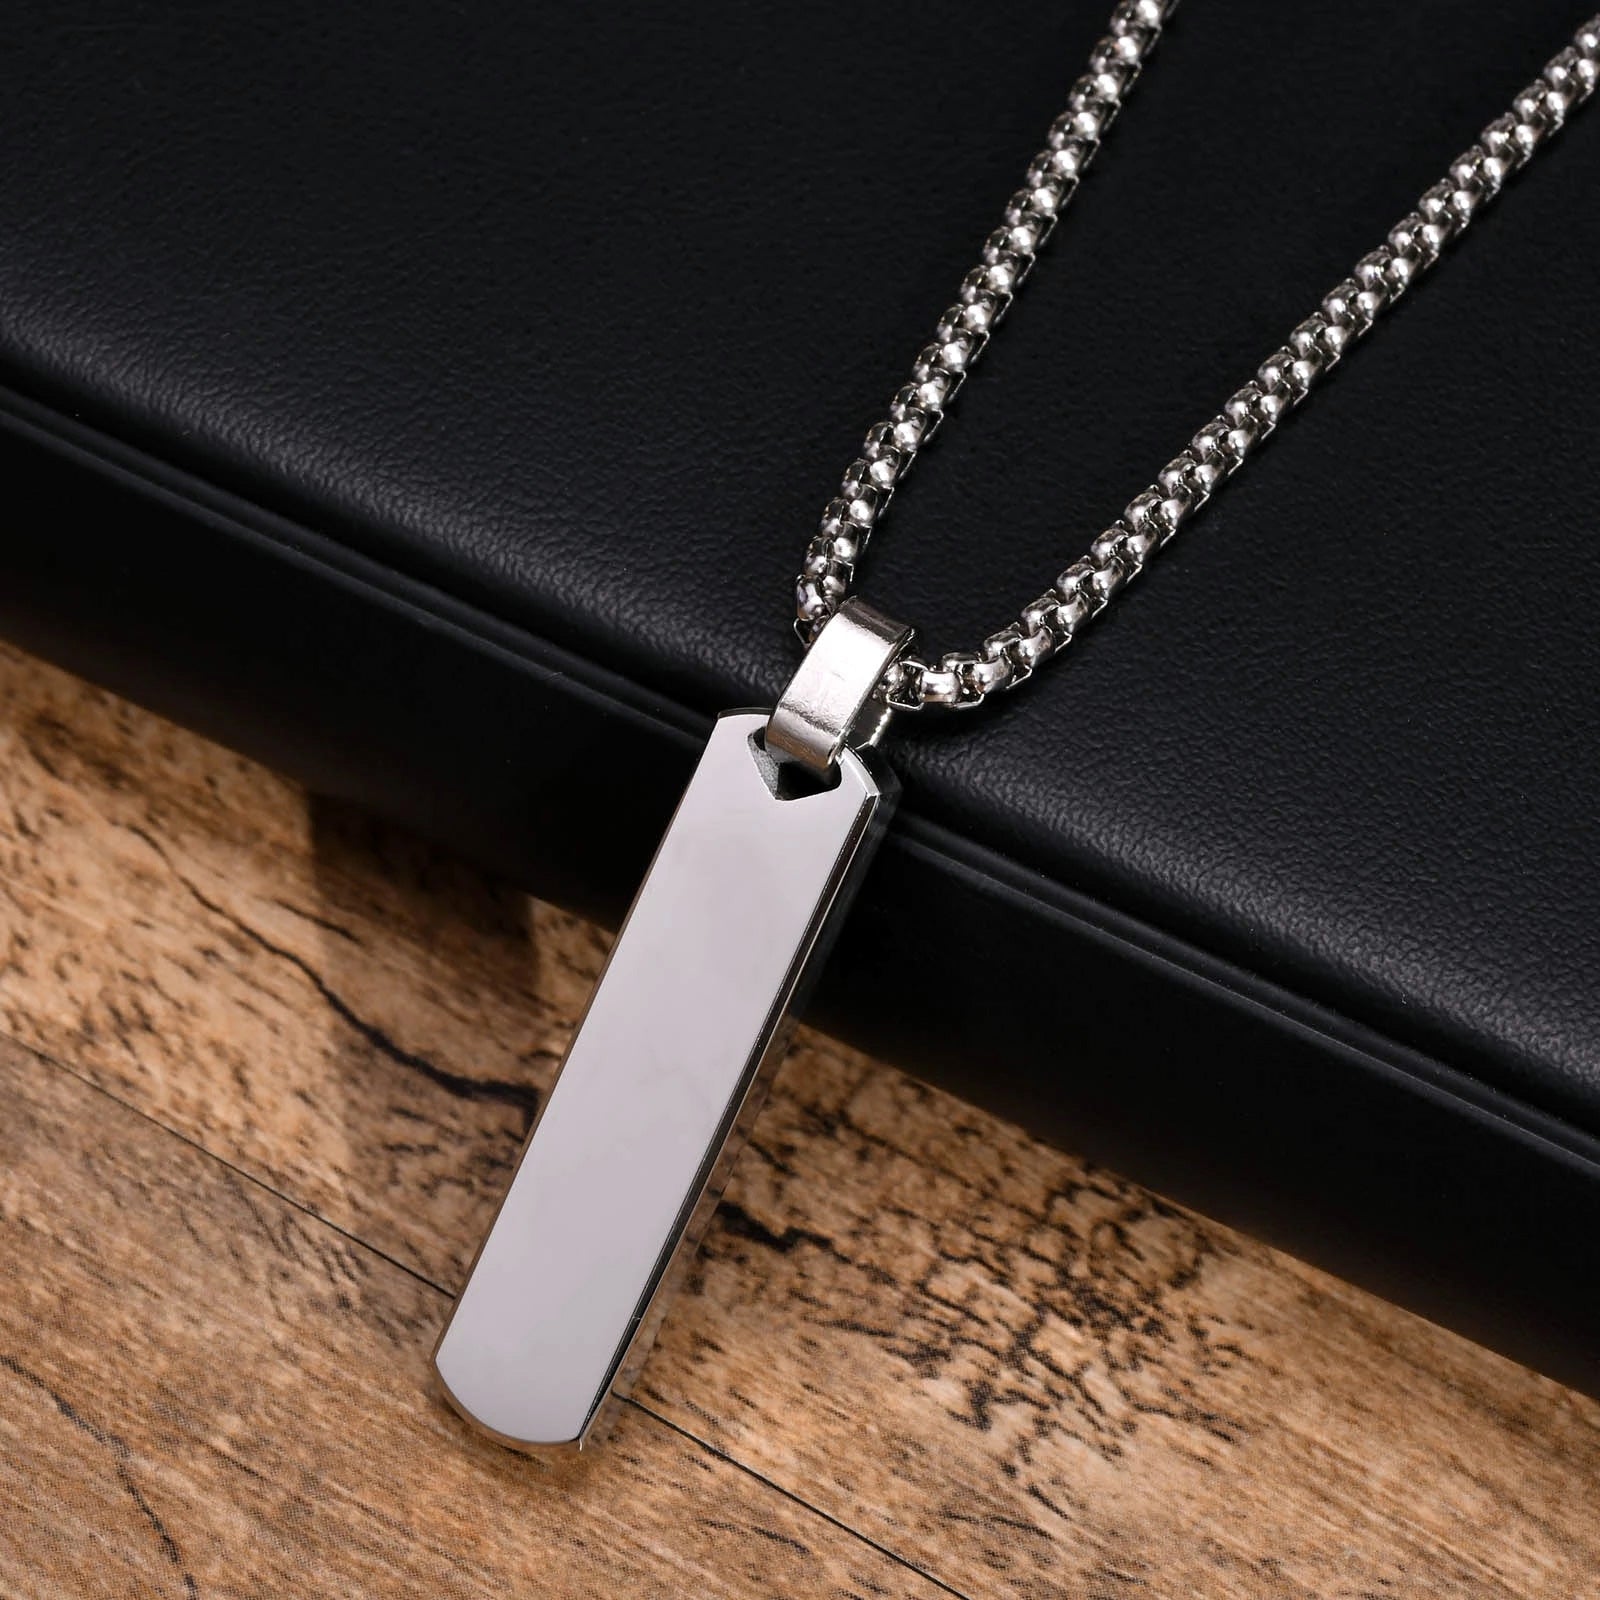 Stainless Steel Thin Rectangular Bar Necklace